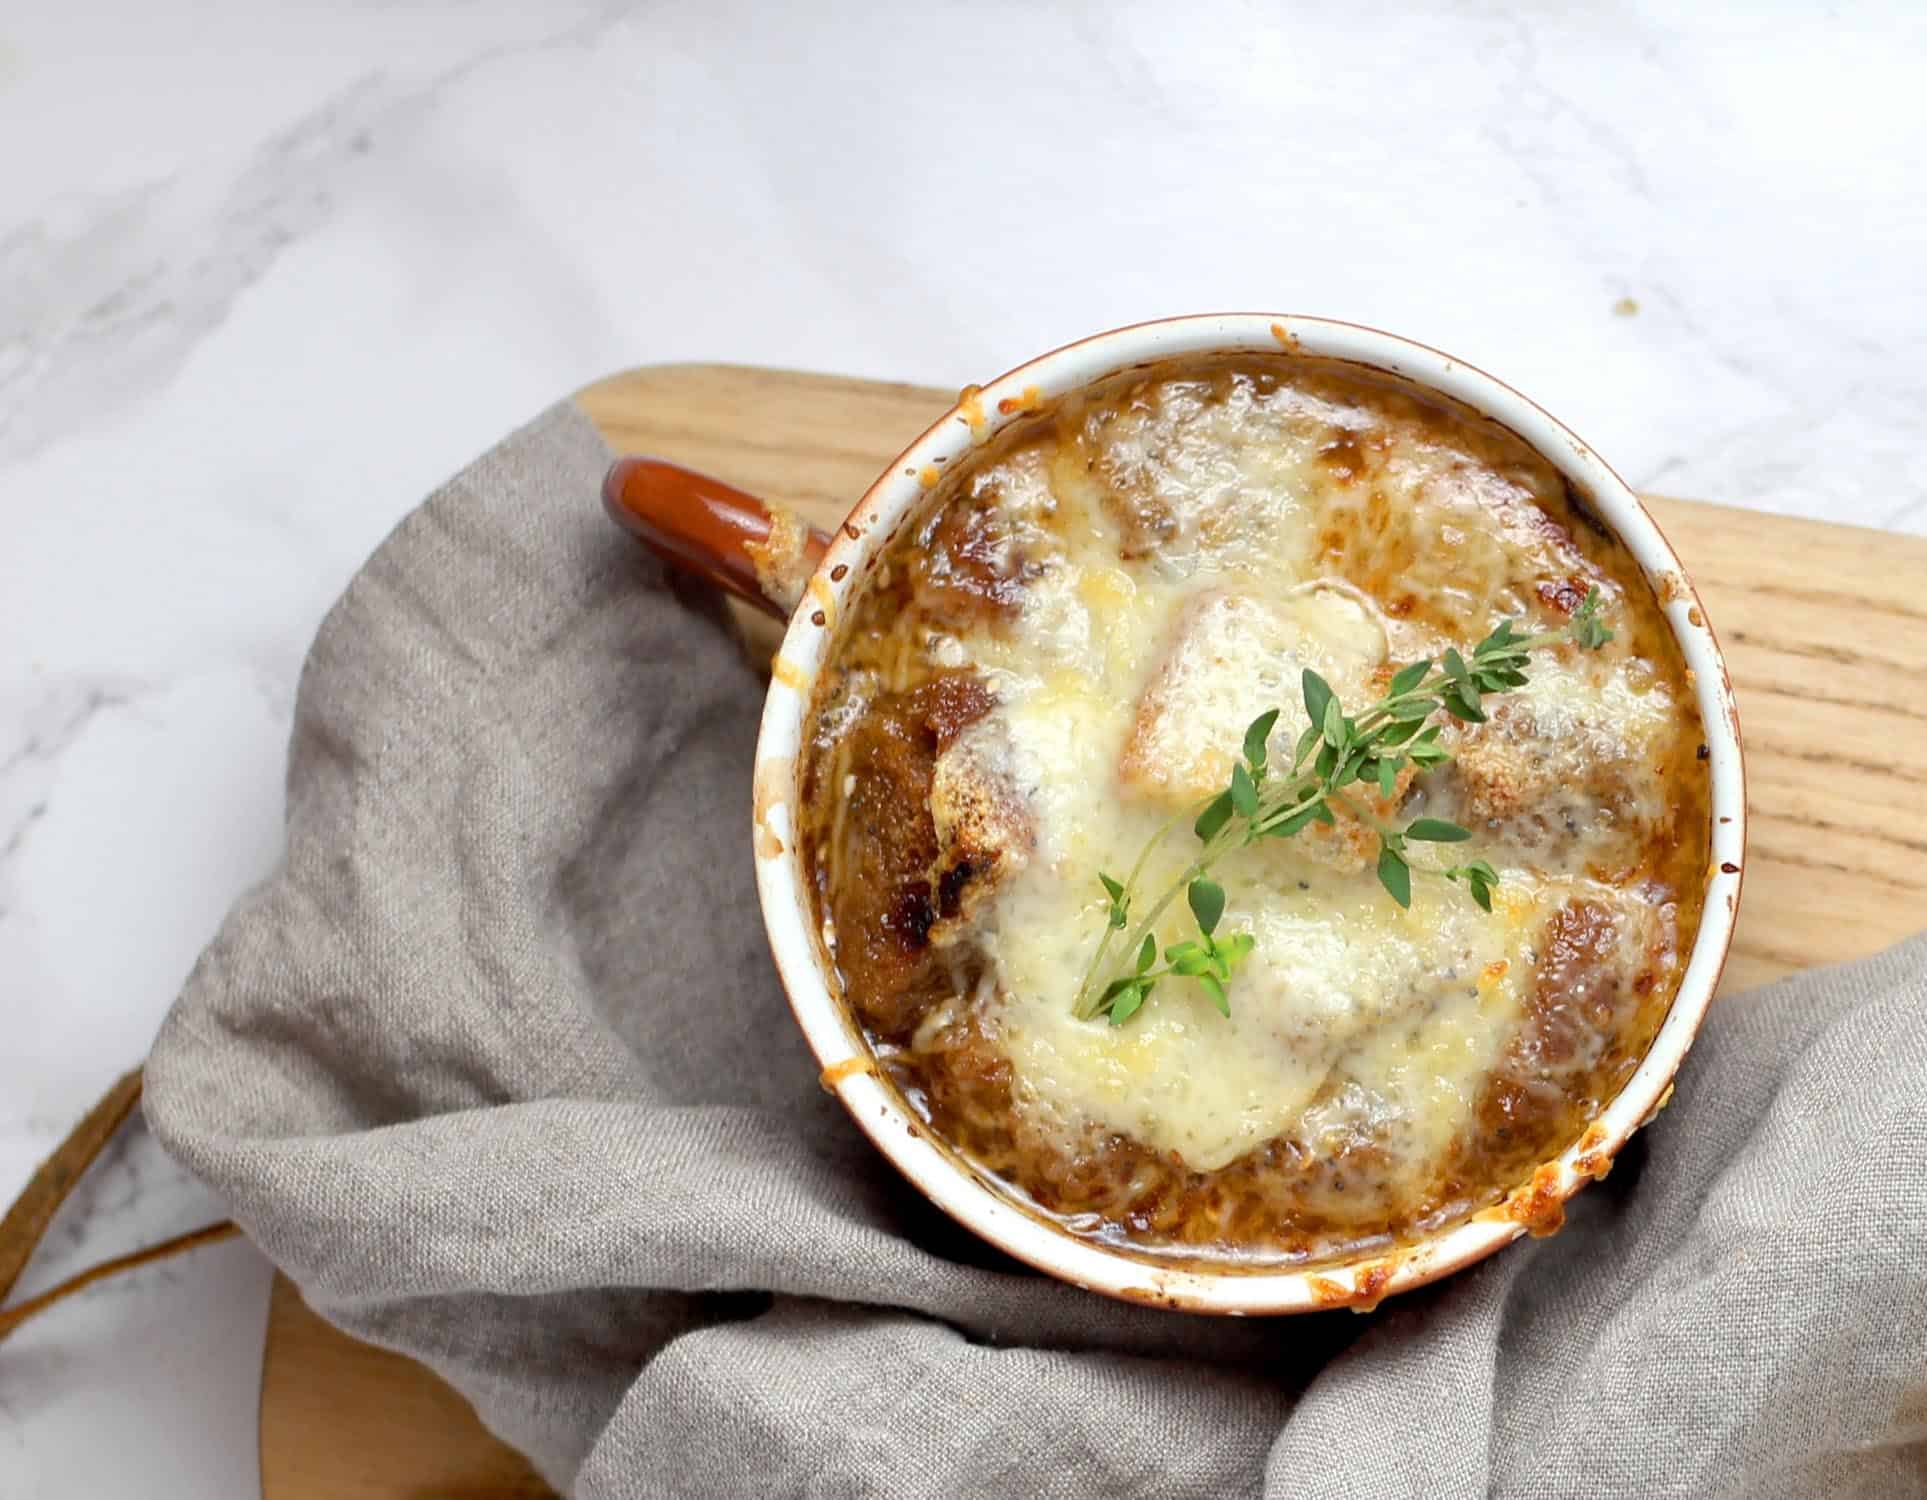 French onion soup is one of the most popular things to eat in Paris